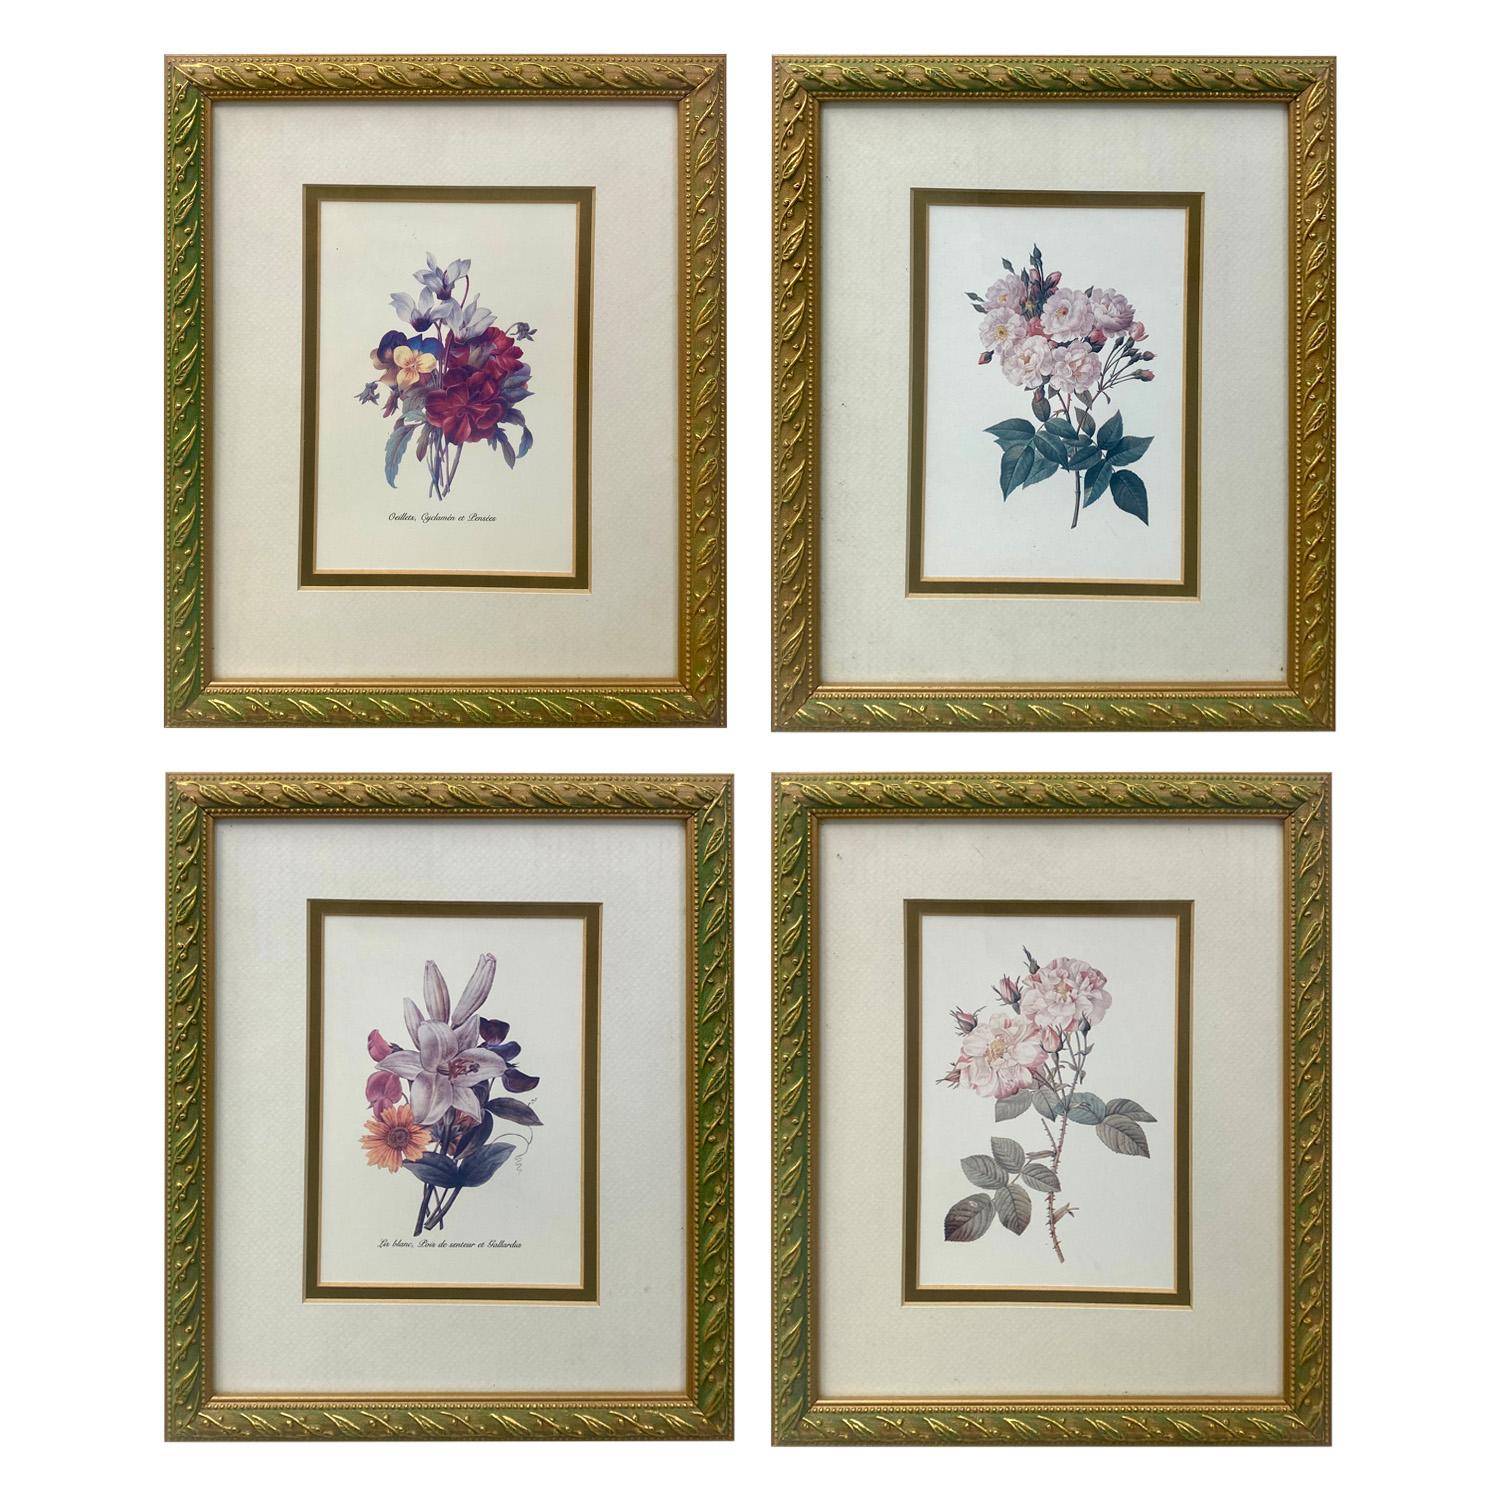 Unknown Print - Vintage Flowers Botanicals, Matted and Framed  Set of 4